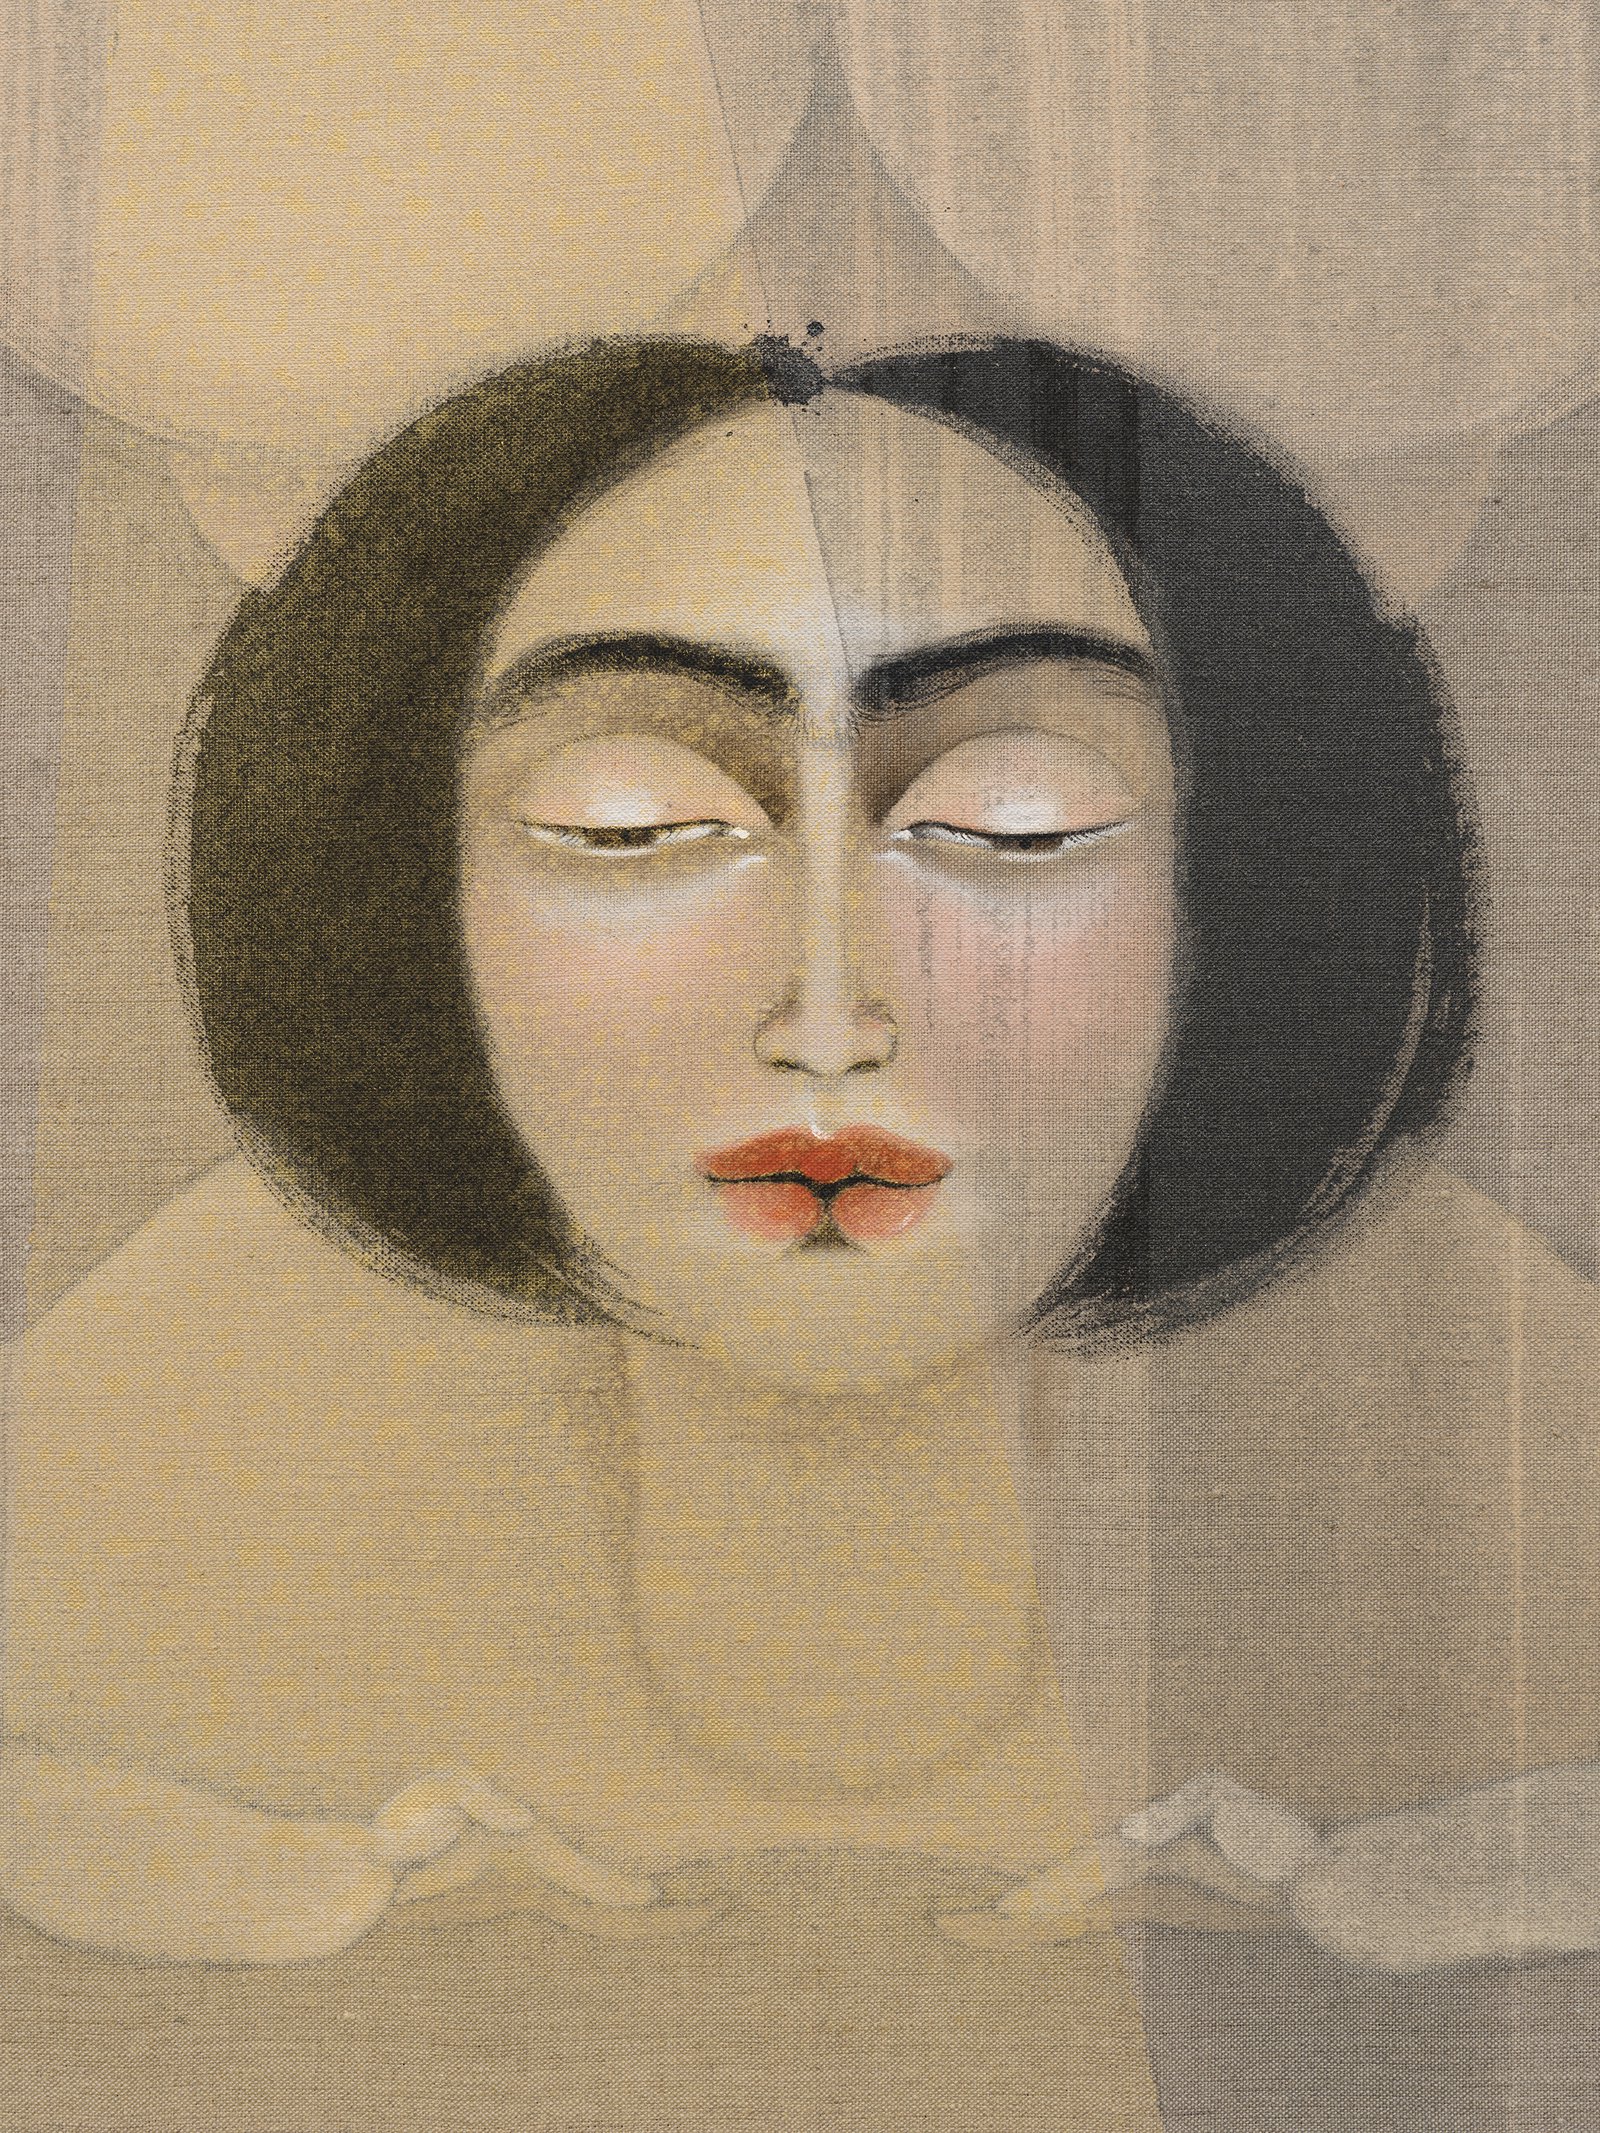 Hayv Kahraman, Not quite human spectacle box, 2019, detail viewOil on linen, 25 x 25 in (63.5 x 63.5 cm)Courtesy of the artist and Veilmetter Los Angeles